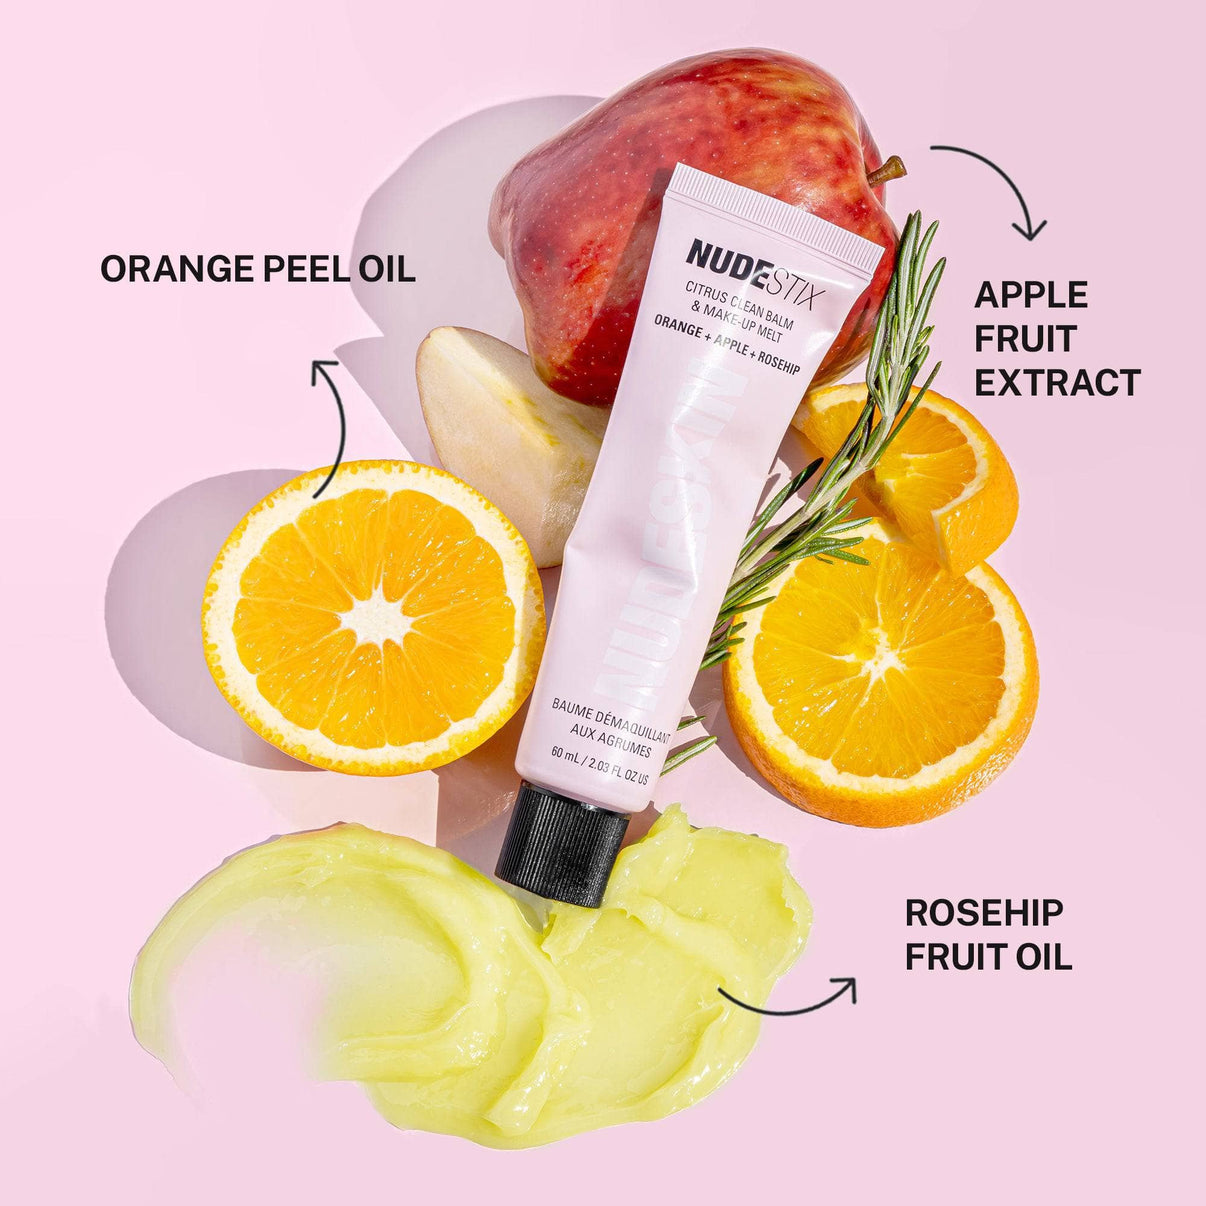 CITRUS CLEAN BALM & MAKE-UP MELT flat lay with apple, orange and rosehip fruit oil